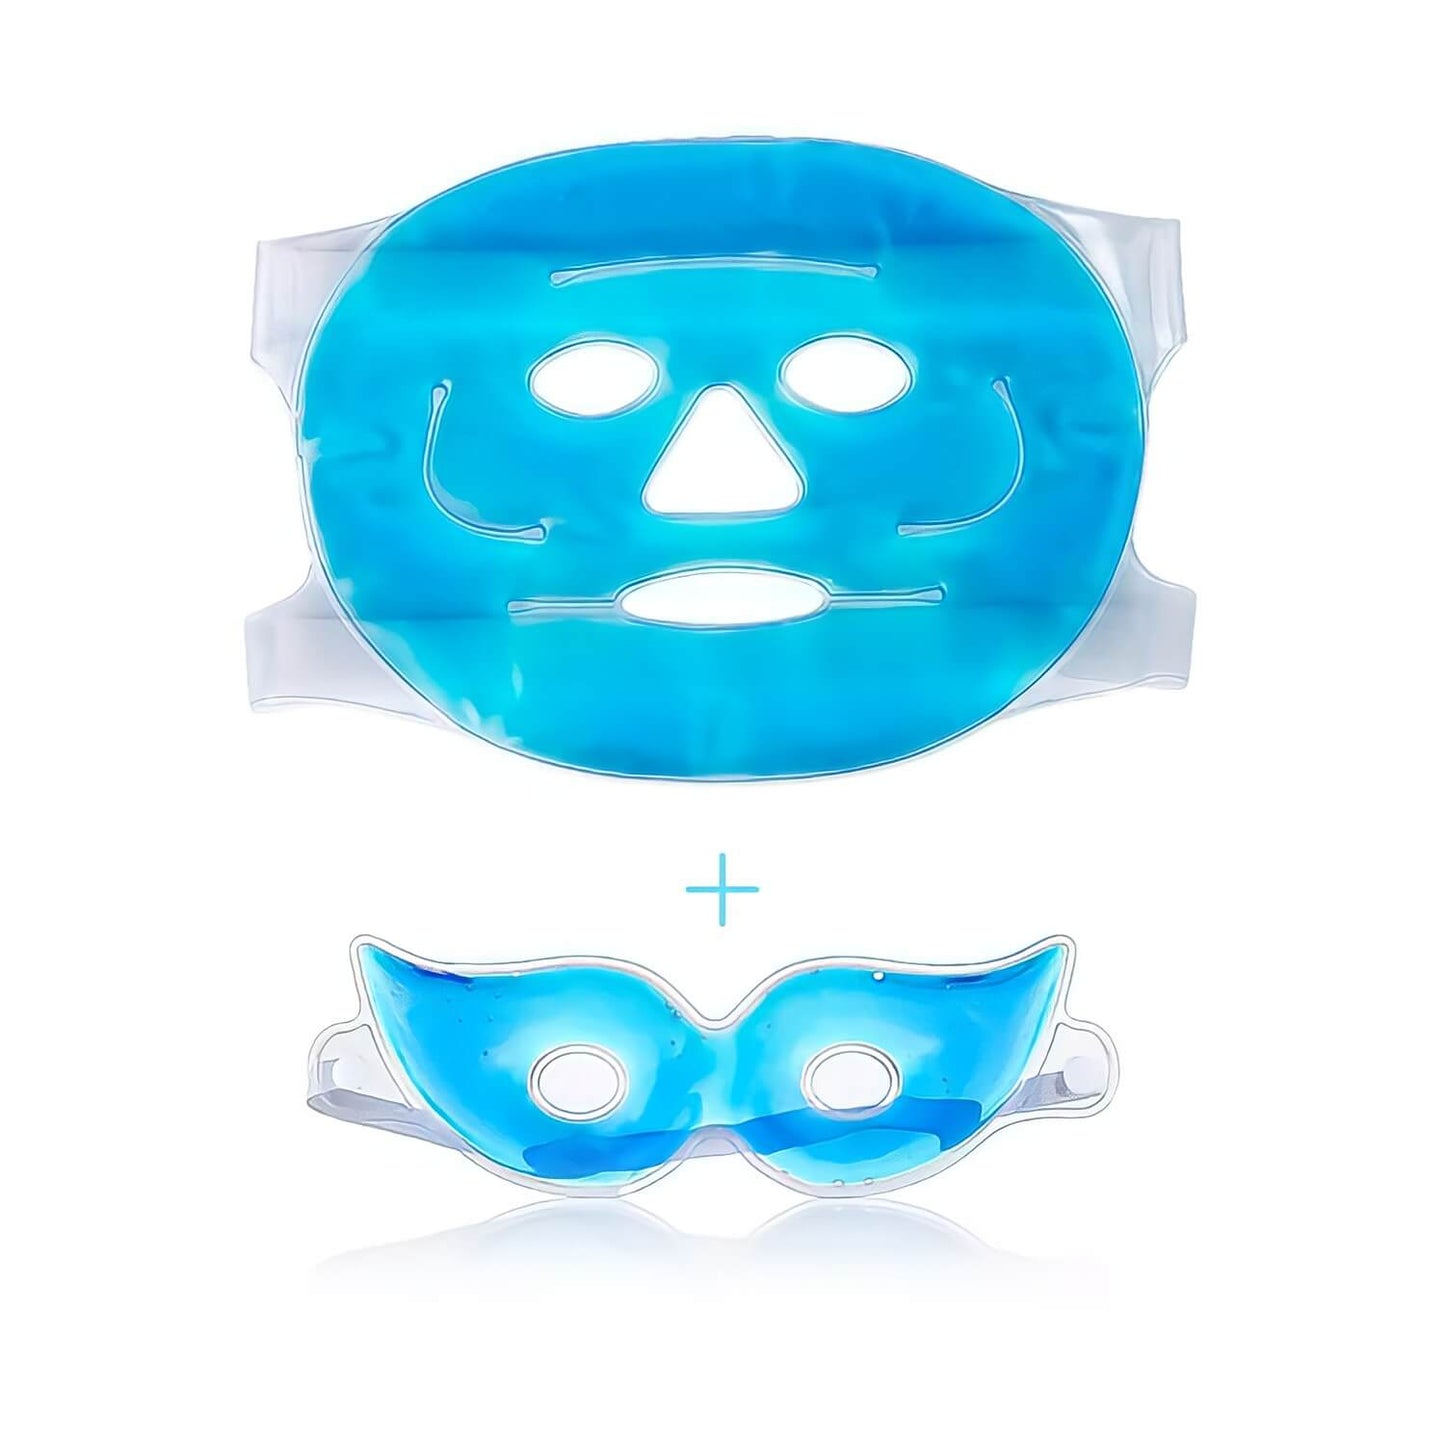 Full face mask and eye mask comb for skincare and cold therapy.